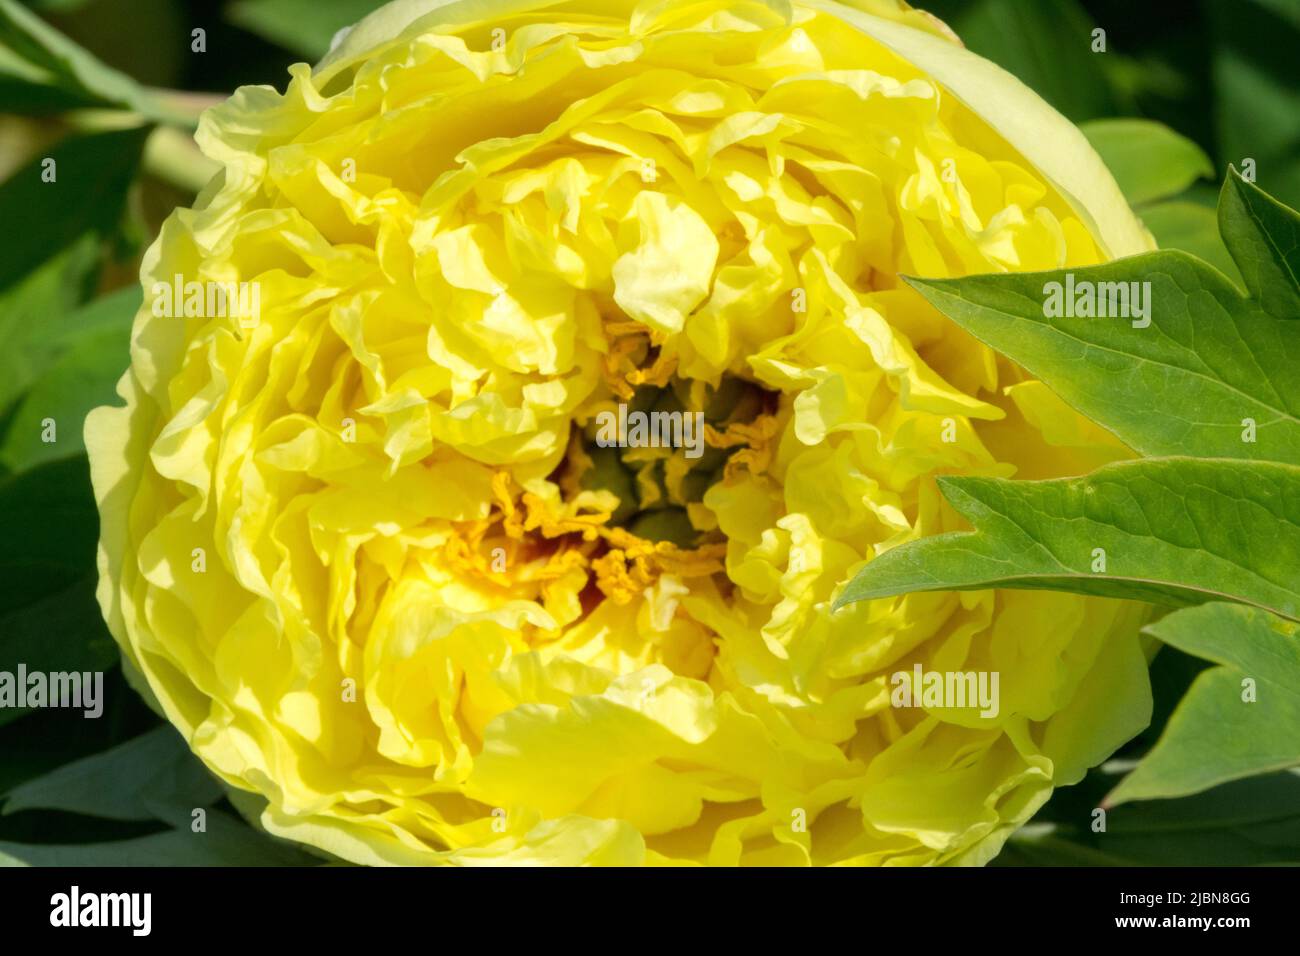 Fleur unique Itoh Peony hybride intersectionnel Paeonia 'Yellow Crown' Grande fleur tête Bloom Peony Yellow Crown floraison Peonies fleurit attrayant Banque D'Images